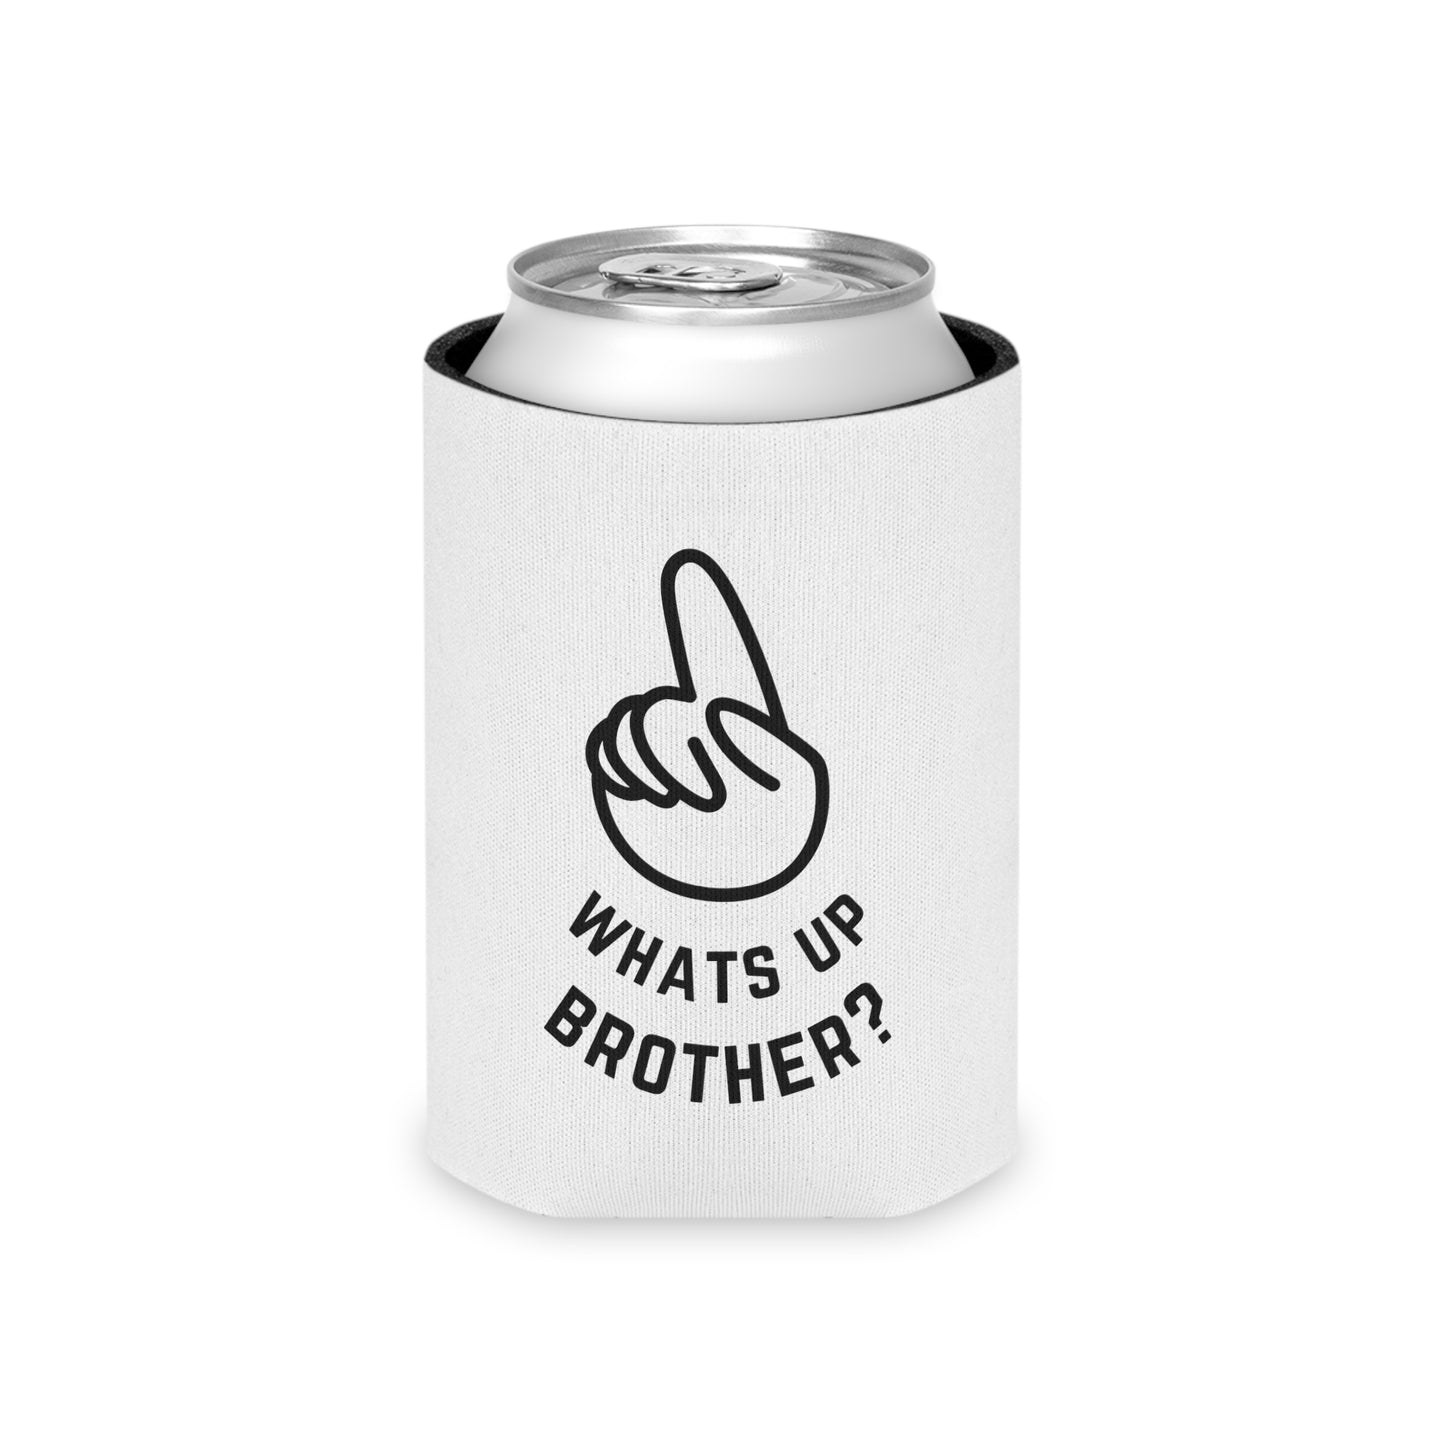 “What’s up brother” Can koozie